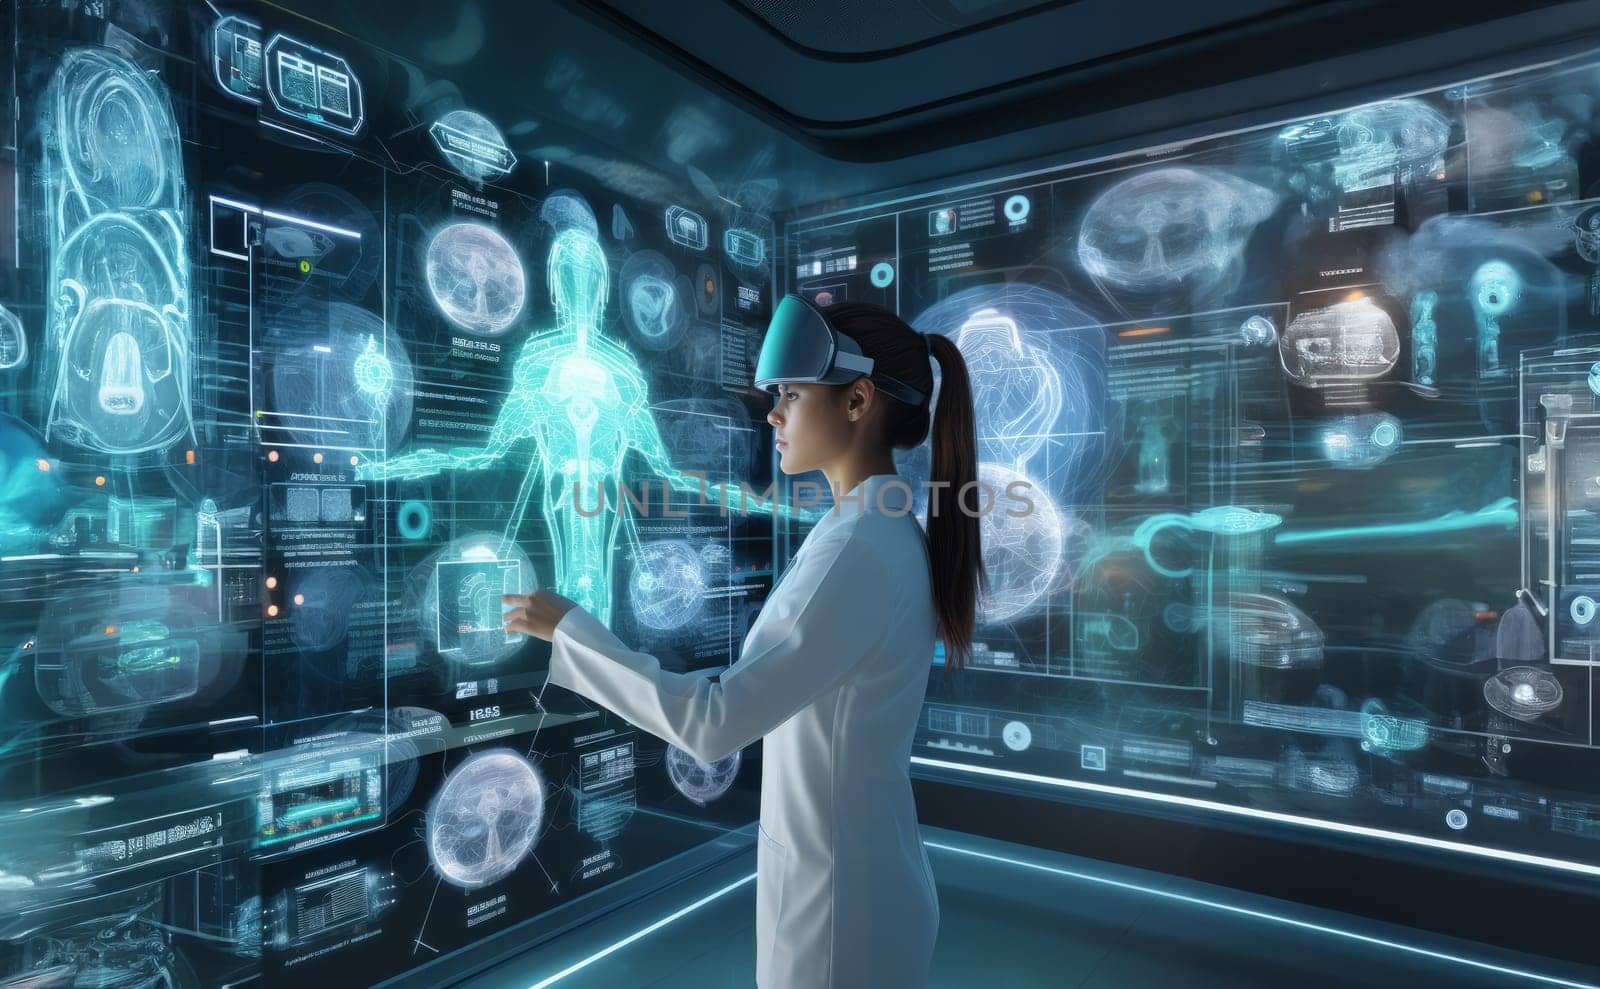 Exploring the Human Body: Doctor Researches in Modern Institute Surrounded by Medical Holograms.Generated image by dotshock